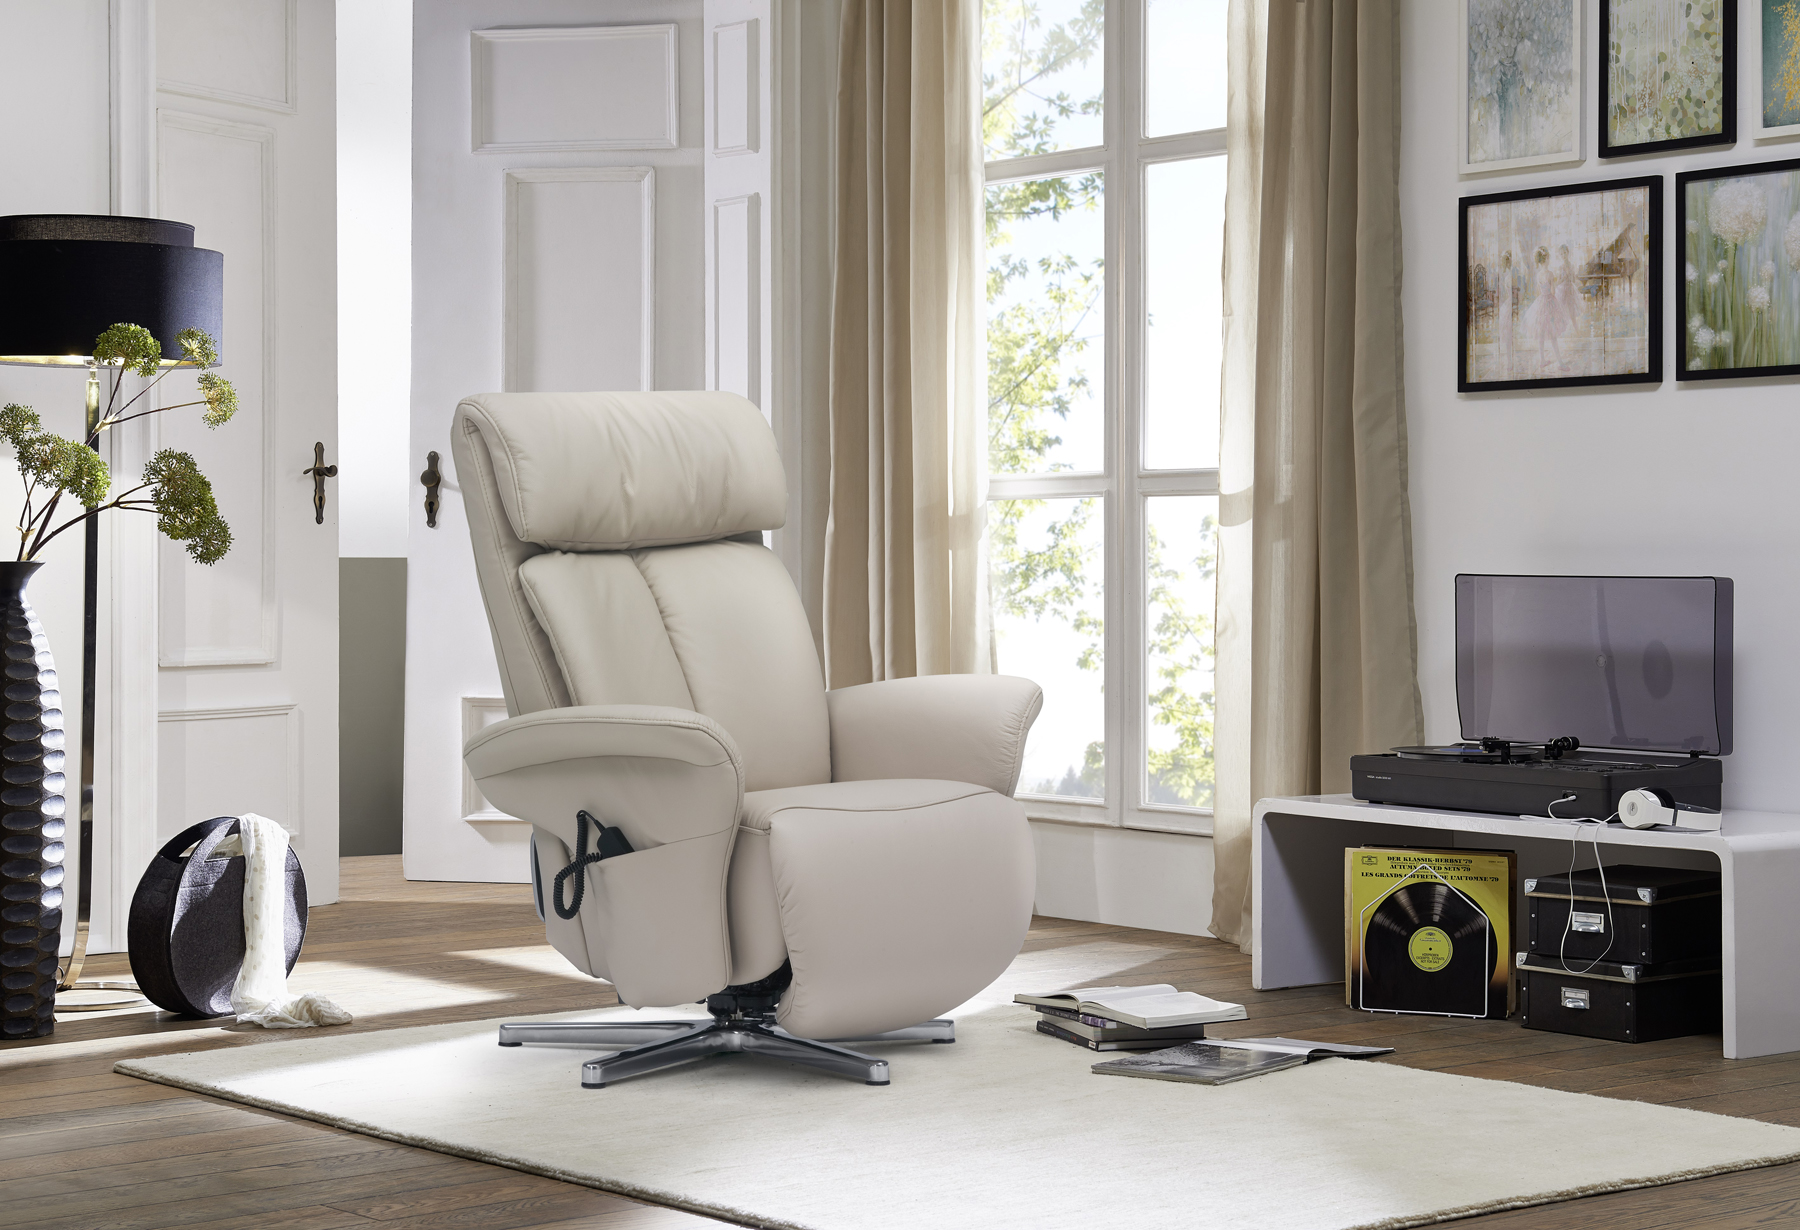 HIMOLLA SINARTRA CREAM LEATHER CHAIR WITH SIDE POCKET